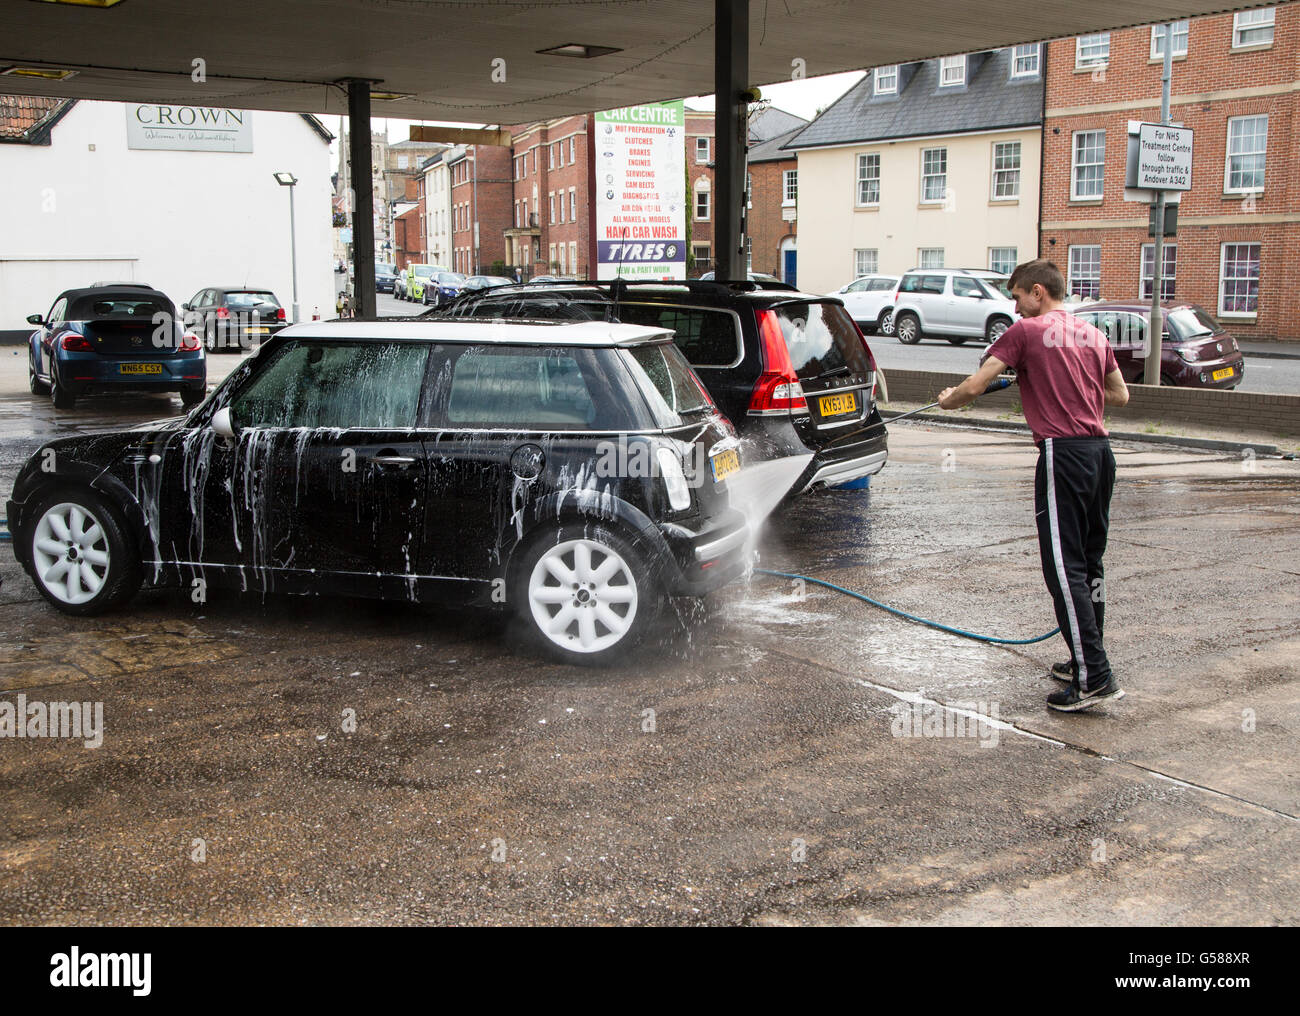 The Best 24 Hour Car Wash Service In The UK